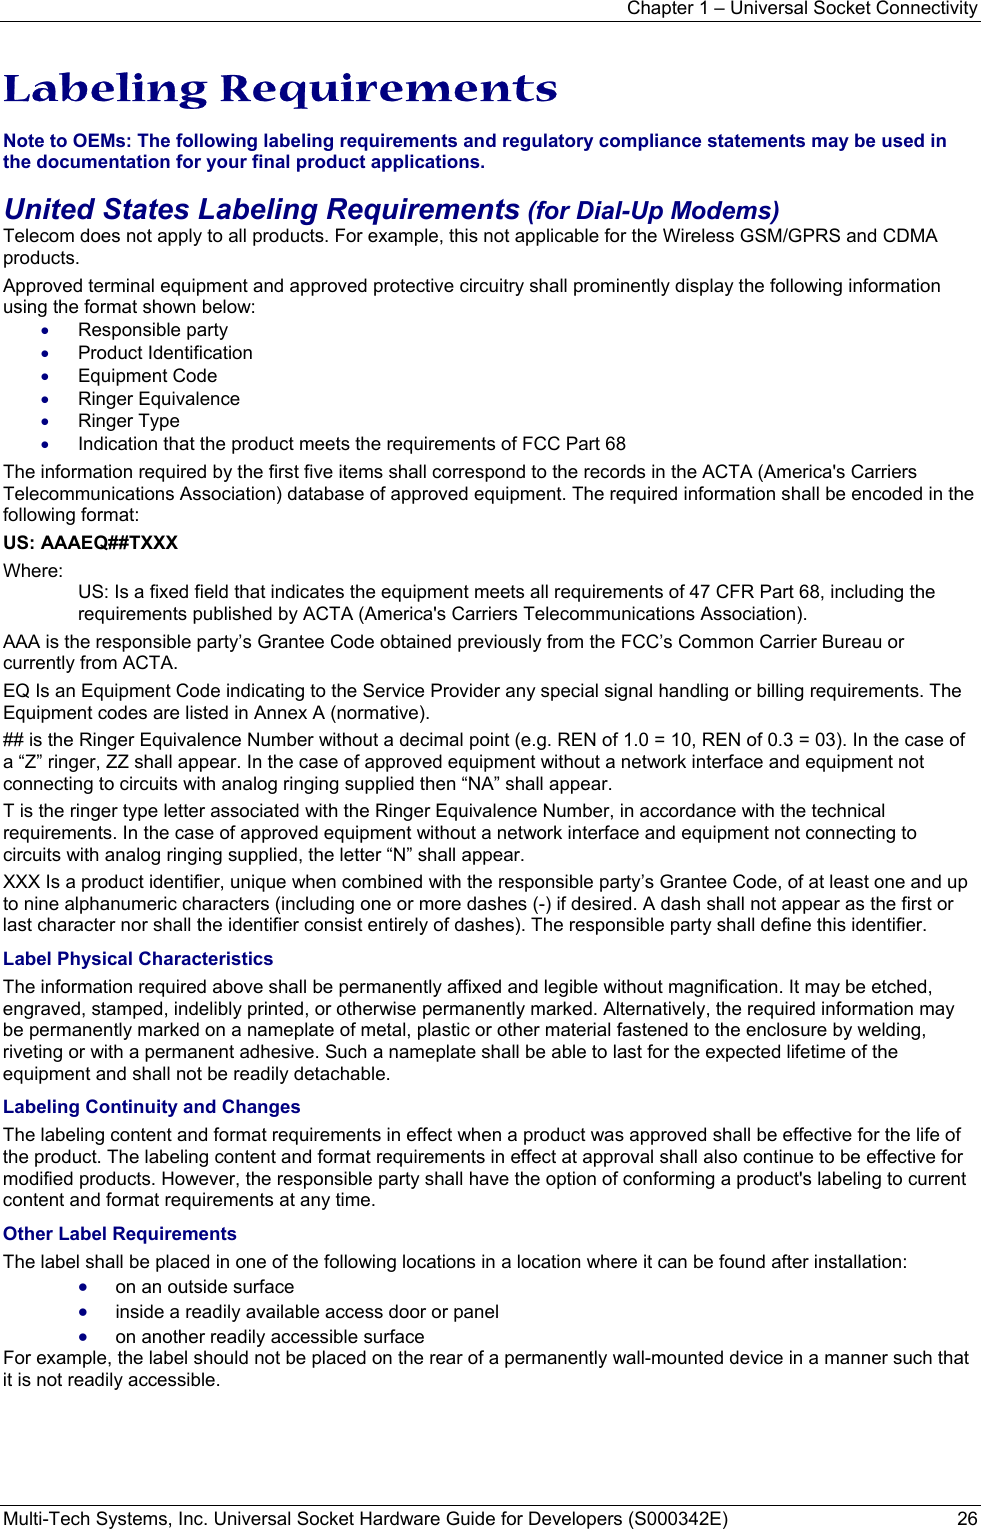 Chapter 1 – Universal Socket Connectivity Multi-Tech Systems, Inc. Universal Socket Hardware Guide for Developers (S000342E)  26  Labeling Requirements  Note to OEMs: The following labeling requirements and regulatory compliance statements may be used in the documentation for your final product applications. United States Labeling Requirements (for Dial-Up Modems) Telecom does not apply to all products. For example, this not applicable for the Wireless GSM/GPRS and CDMA products. Approved terminal equipment and approved protective circuitry shall prominently display the following information using the format shown below: • Responsible party • Product Identification • Equipment Code • Ringer Equivalence • Ringer Type • Indication that the product meets the requirements of FCC Part 68 The information required by the first five items shall correspond to the records in the ACTA (America&apos;s Carriers Telecommunications Association) database of approved equipment. The required information shall be encoded in the following format: US: AAAEQ##TXXX Where: US: Is a fixed field that indicates the equipment meets all requirements of 47 CFR Part 68, including the requirements published by ACTA (America&apos;s Carriers Telecommunications Association). AAA is the responsible party’s Grantee Code obtained previously from the FCC’s Common Carrier Bureau or currently from ACTA. EQ Is an Equipment Code indicating to the Service Provider any special signal handling or billing requirements. The Equipment codes are listed in Annex A (normative). ## is the Ringer Equivalence Number without a decimal point (e.g. REN of 1.0 = 10, REN of 0.3 = 03). In the case of a “Z” ringer, ZZ shall appear. In the case of approved equipment without a network interface and equipment not connecting to circuits with analog ringing supplied then “NA” shall appear. T is the ringer type letter associated with the Ringer Equivalence Number, in accordance with the technical requirements. In the case of approved equipment without a network interface and equipment not connecting to circuits with analog ringing supplied, the letter “N” shall appear. XXX Is a product identifier, unique when combined with the responsible party’s Grantee Code, of at least one and up to nine alphanumeric characters (including one or more dashes (-) if desired. A dash shall not appear as the first or last character nor shall the identifier consist entirely of dashes). The responsible party shall define this identifier. Label Physical Characteristics The information required above shall be permanently affixed and legible without magnification. It may be etched, engraved, stamped, indelibly printed, or otherwise permanently marked. Alternatively, the required information may be permanently marked on a nameplate of metal, plastic or other material fastened to the enclosure by welding, riveting or with a permanent adhesive. Such a nameplate shall be able to last for the expected lifetime of the equipment and shall not be readily detachable. Labeling Continuity and Changes The labeling content and format requirements in effect when a product was approved shall be effective for the life of the product. The labeling content and format requirements in effect at approval shall also continue to be effective for modified products. However, the responsible party shall have the option of conforming a product&apos;s labeling to current content and format requirements at any time. Other Label Requirements The label shall be placed in one of the following locations in a location where it can be found after installation: • on an outside surface • inside a readily available access door or panel • on another readily accessible surface For example, the label should not be placed on the rear of a permanently wall-mounted device in a manner such that it is not readily accessible. 